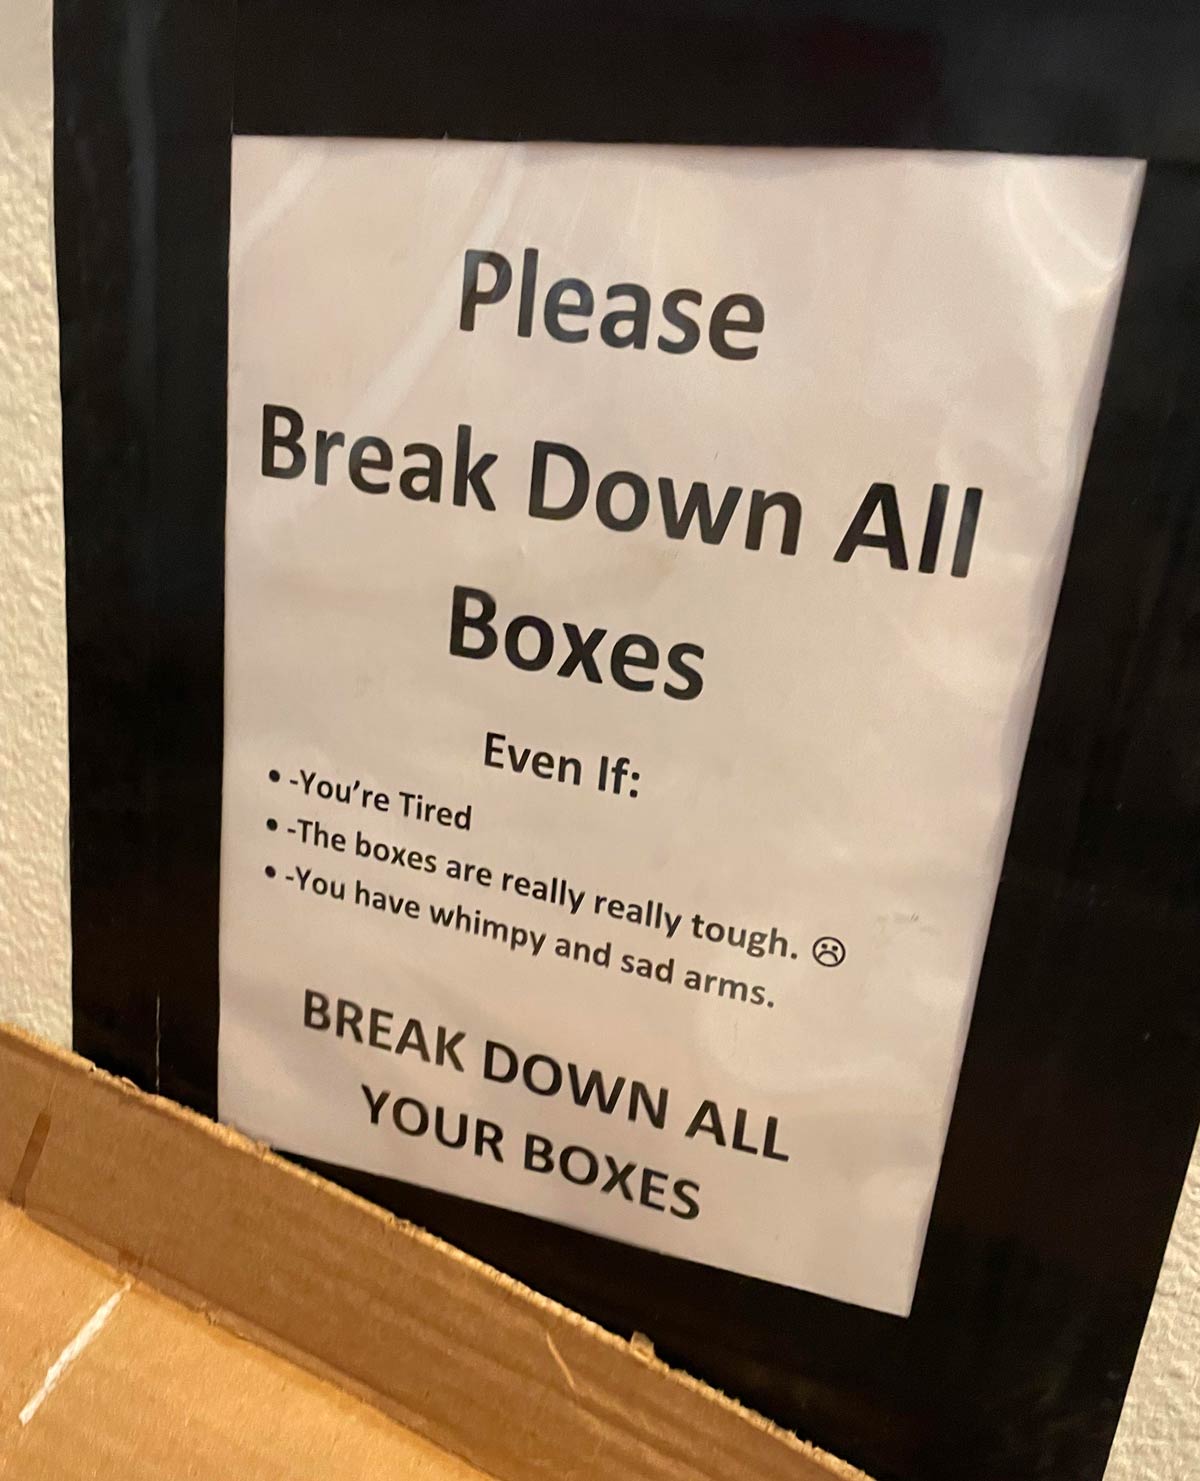 Break down all your boxes!